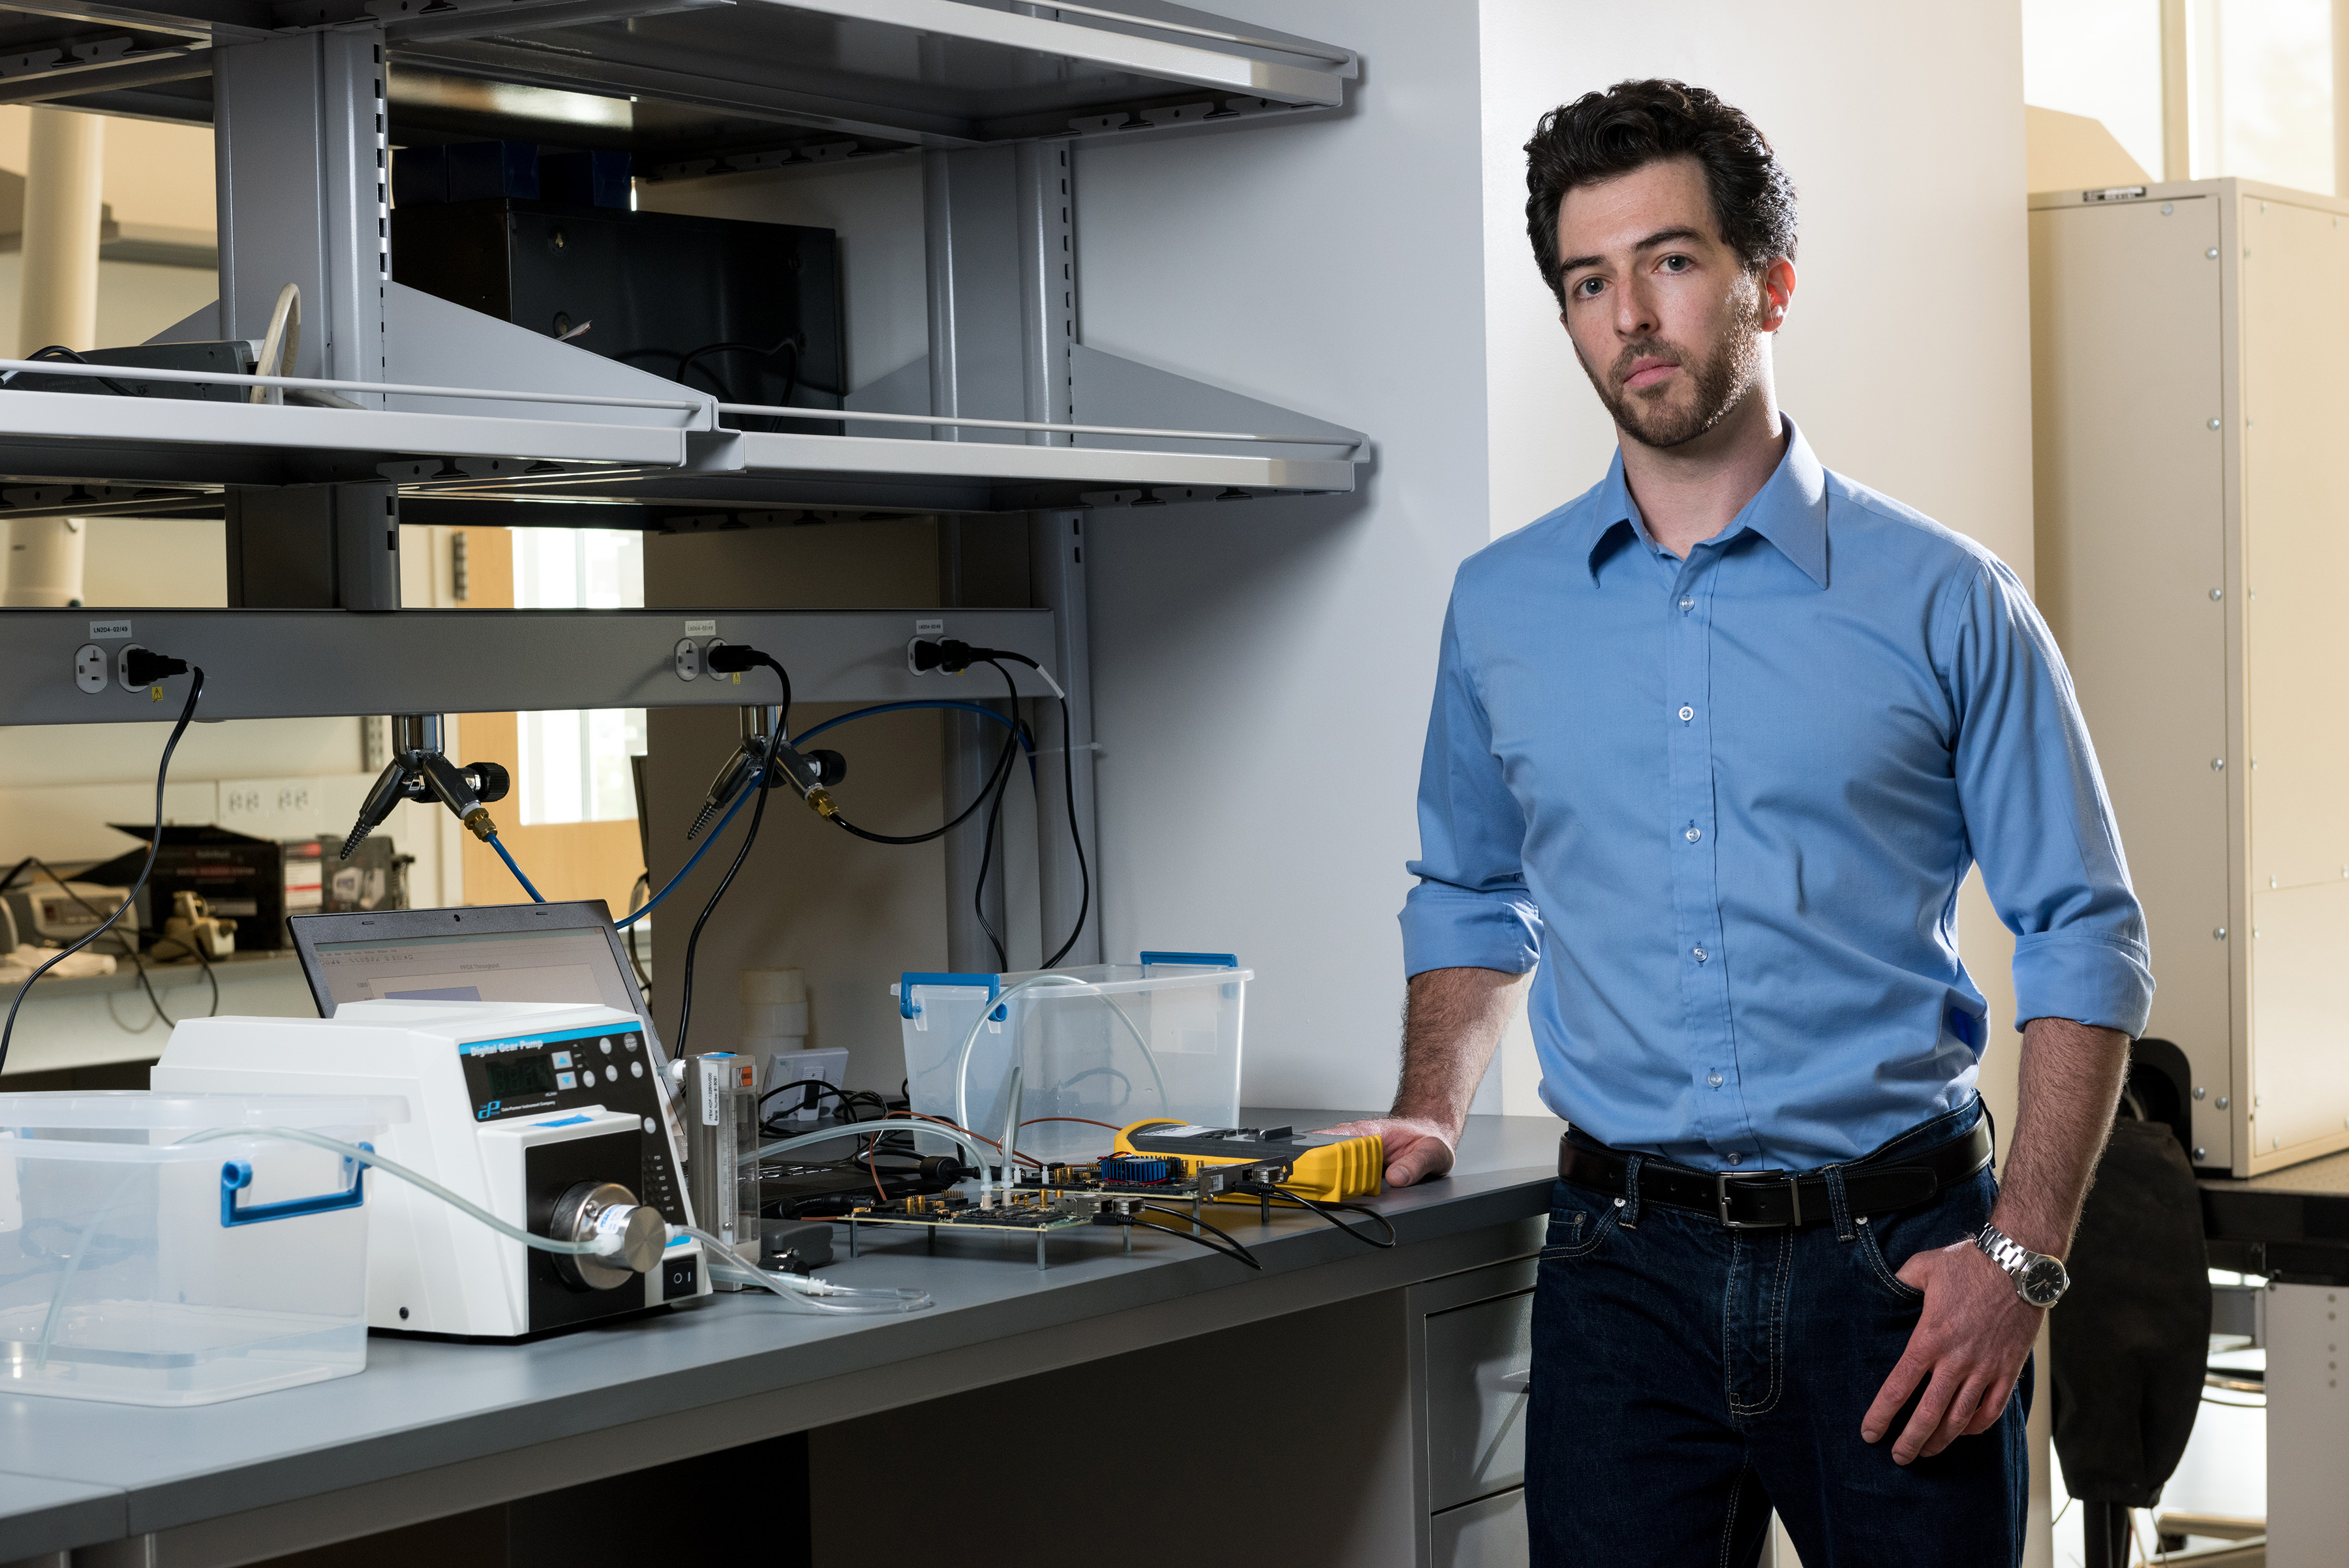 Georgia Tech graduate student Tom Sarvey is shown with test equipment used to compare the performance of stock FPGA devices, one with experimental liquid cooling and the other using stock air cooling. (Credit: Rob Felt, Georgia Tech)